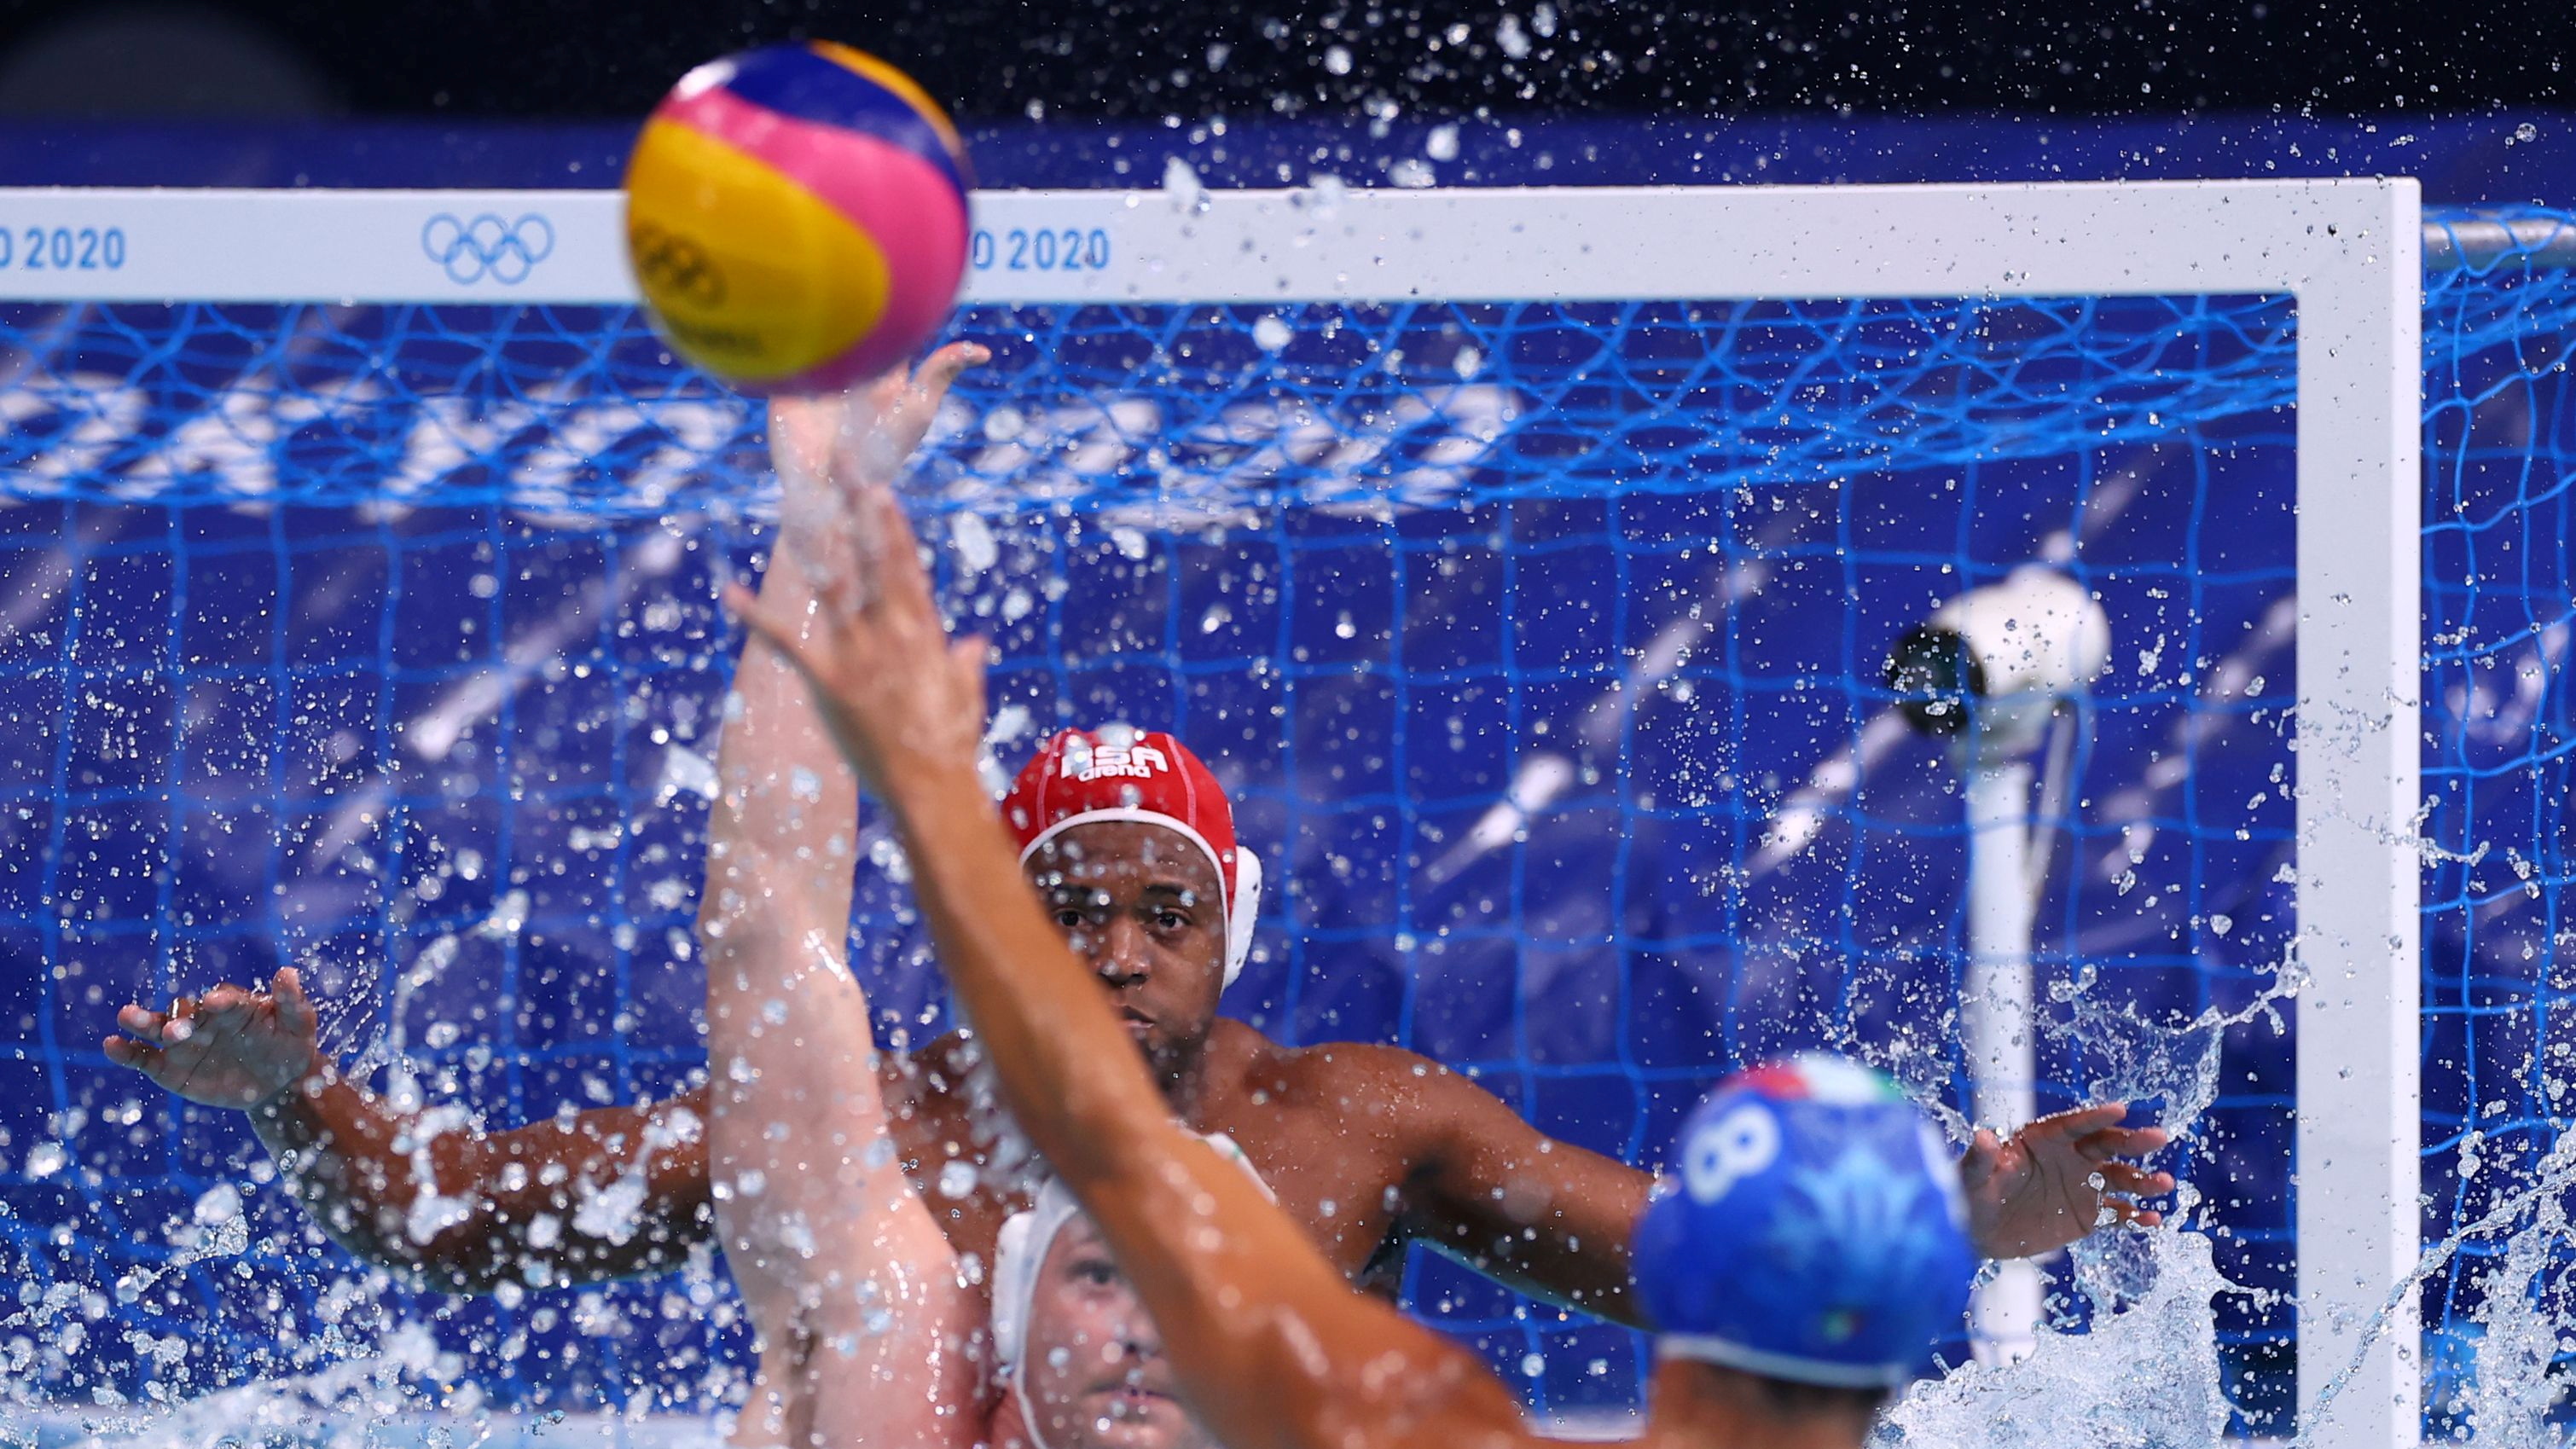 Water Polo - Men - Group A - South Africa v Italy